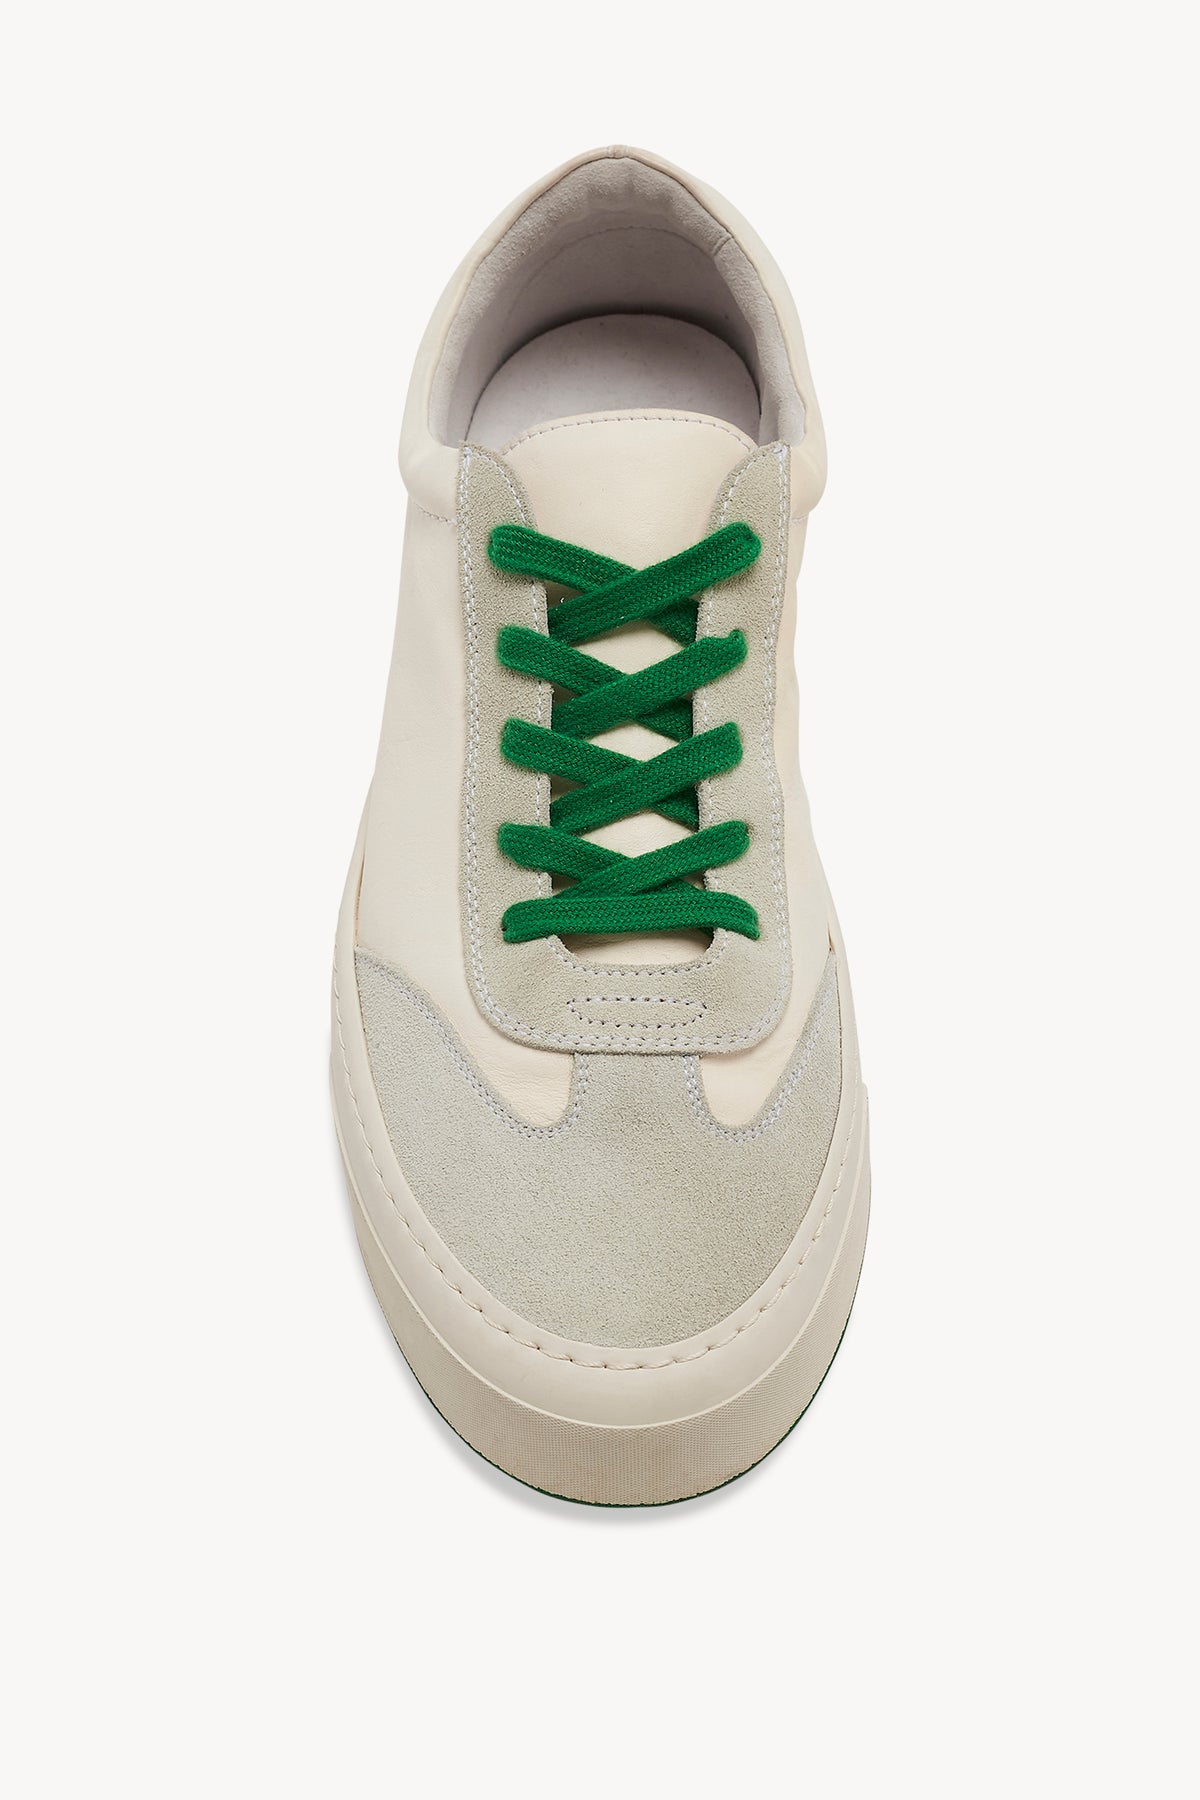 Marley Lace-Up Sneaker in Leather and Suede